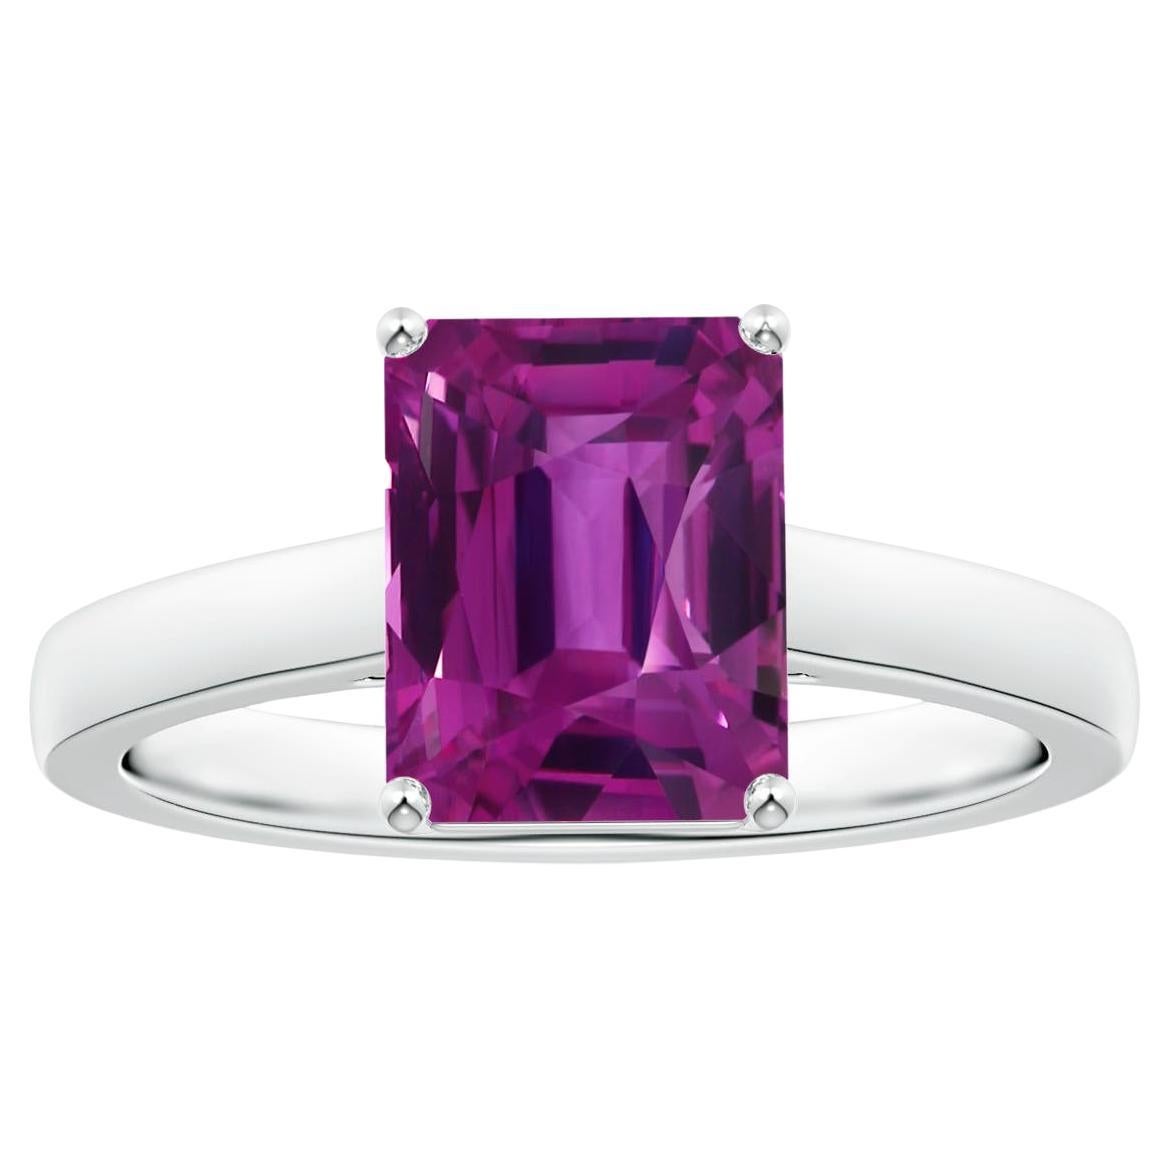 For Sale:  ANGARA GIA Certified Emerald-Cut Pink Sapphire Solitaire Ring in Platinum